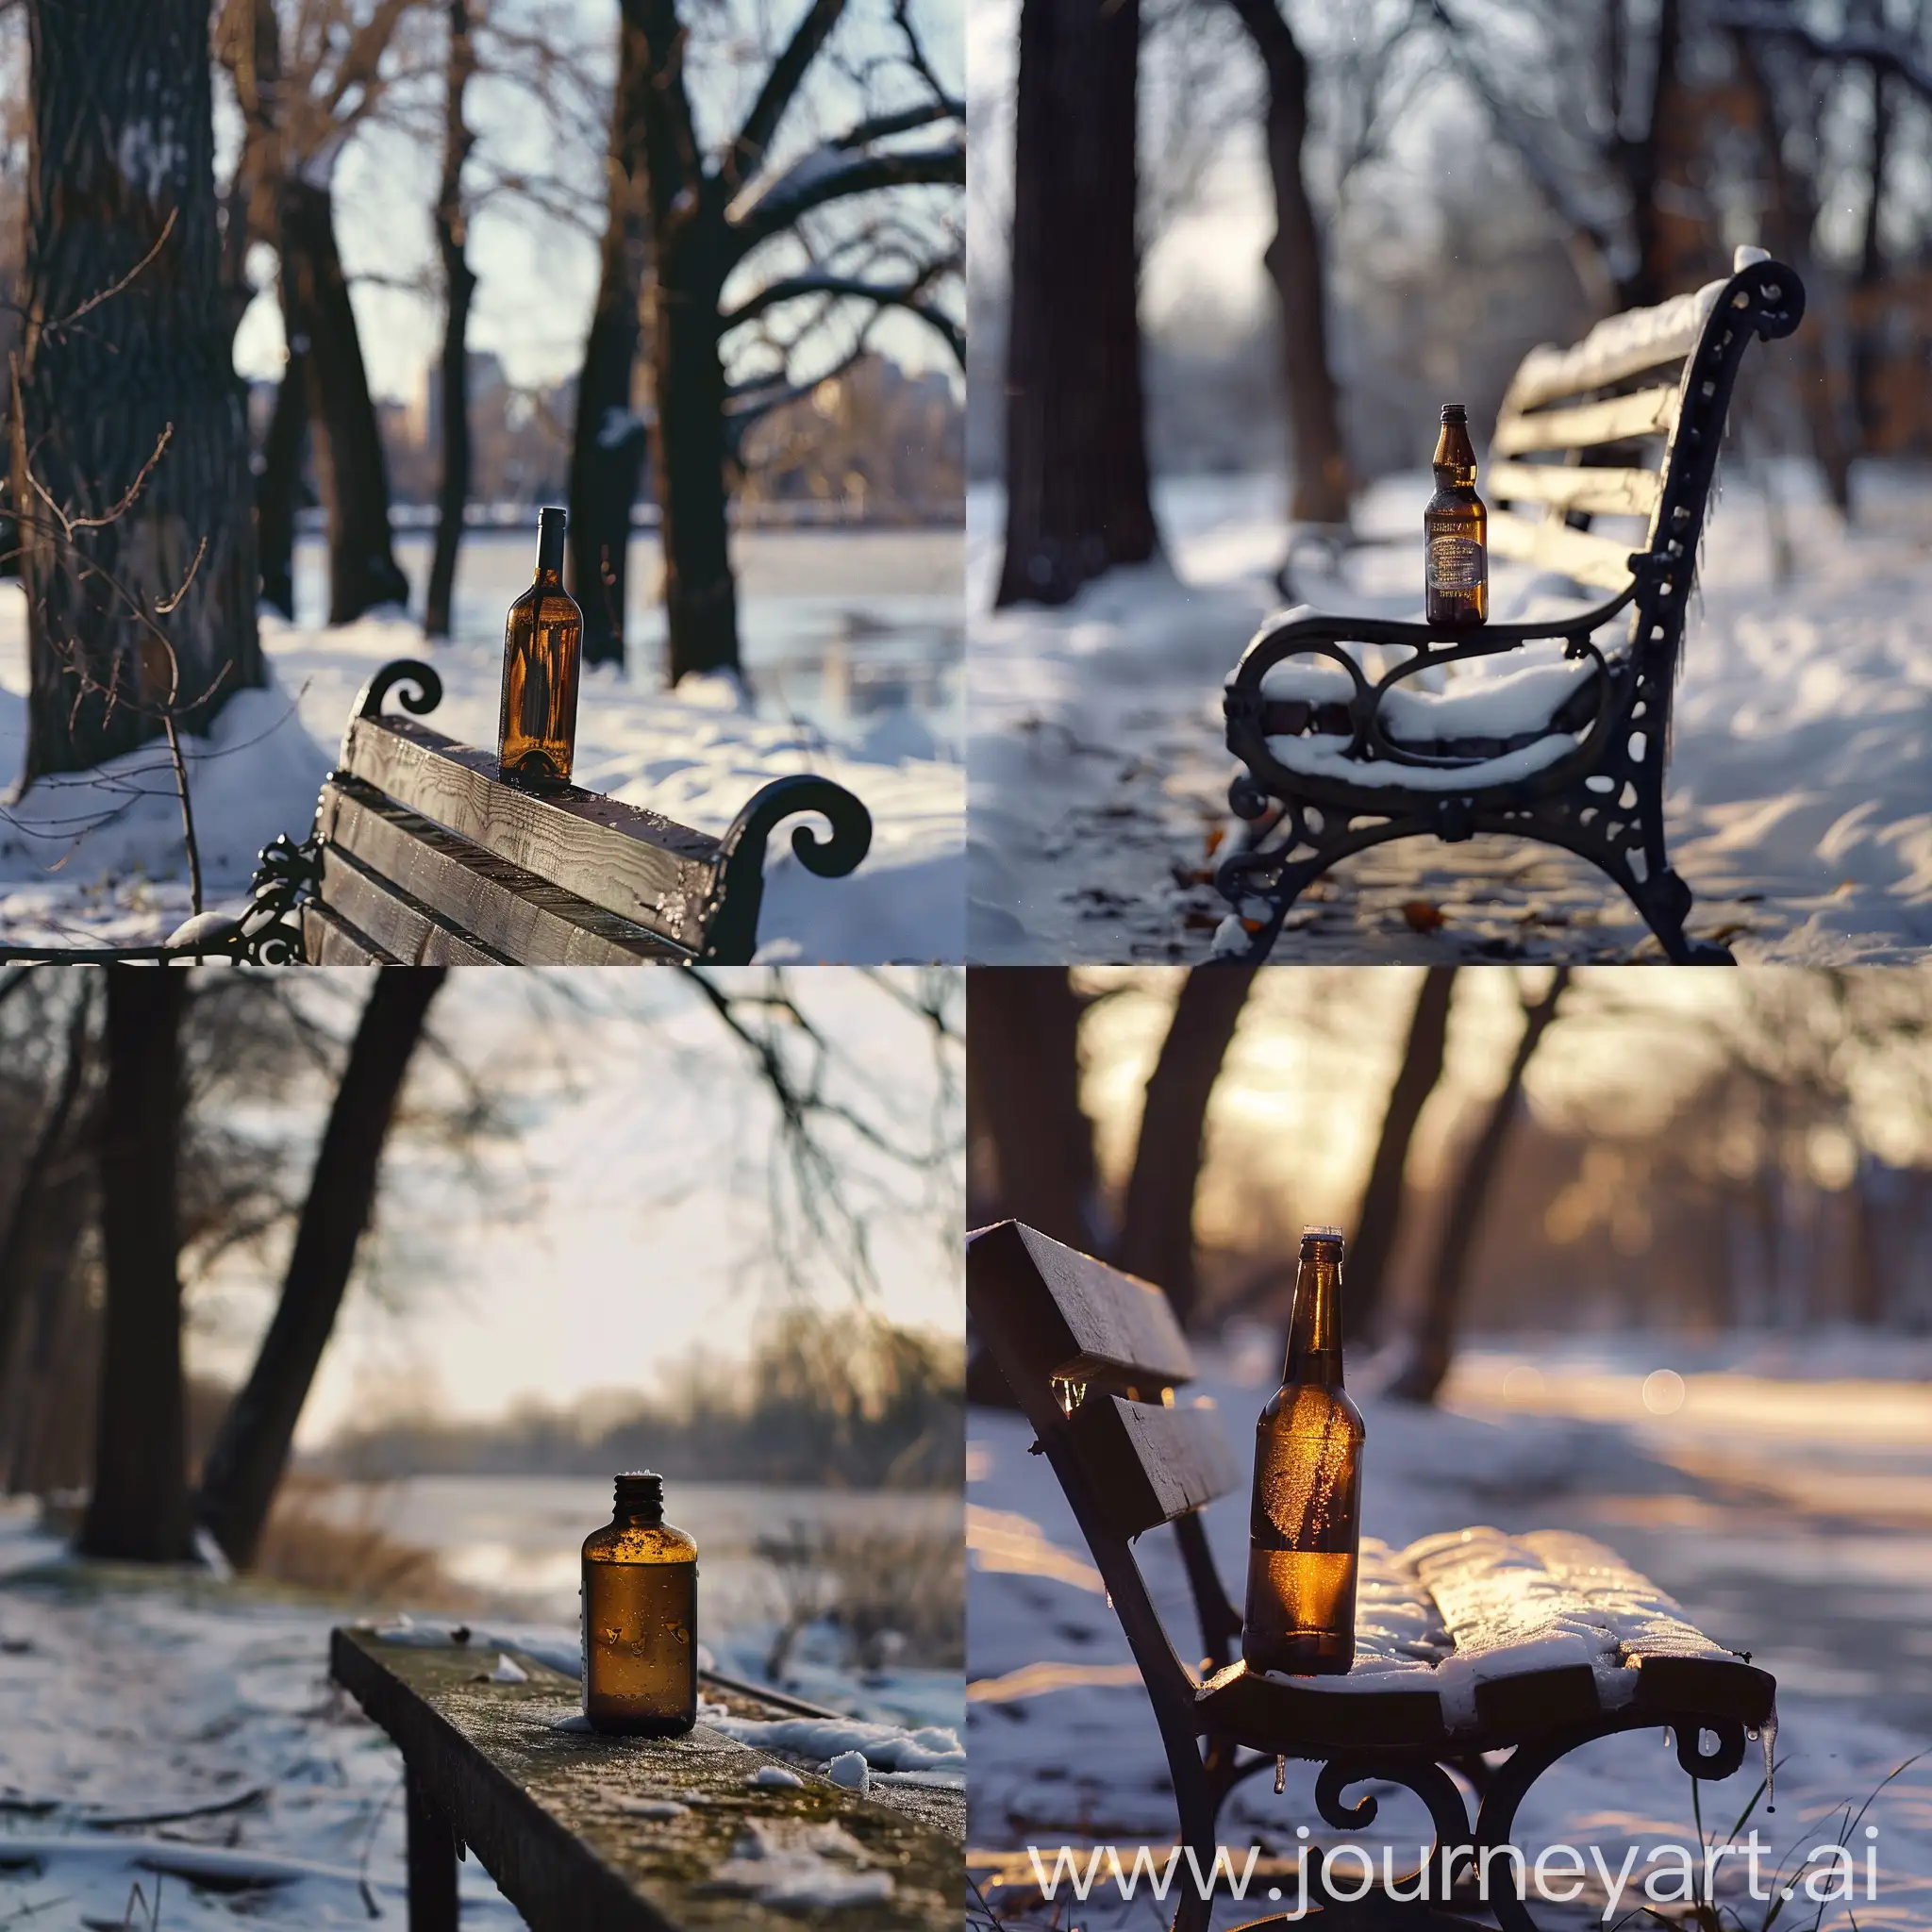 Lonely-Winter-Scene-with-Abandoned-Bottle-on-a-Bench